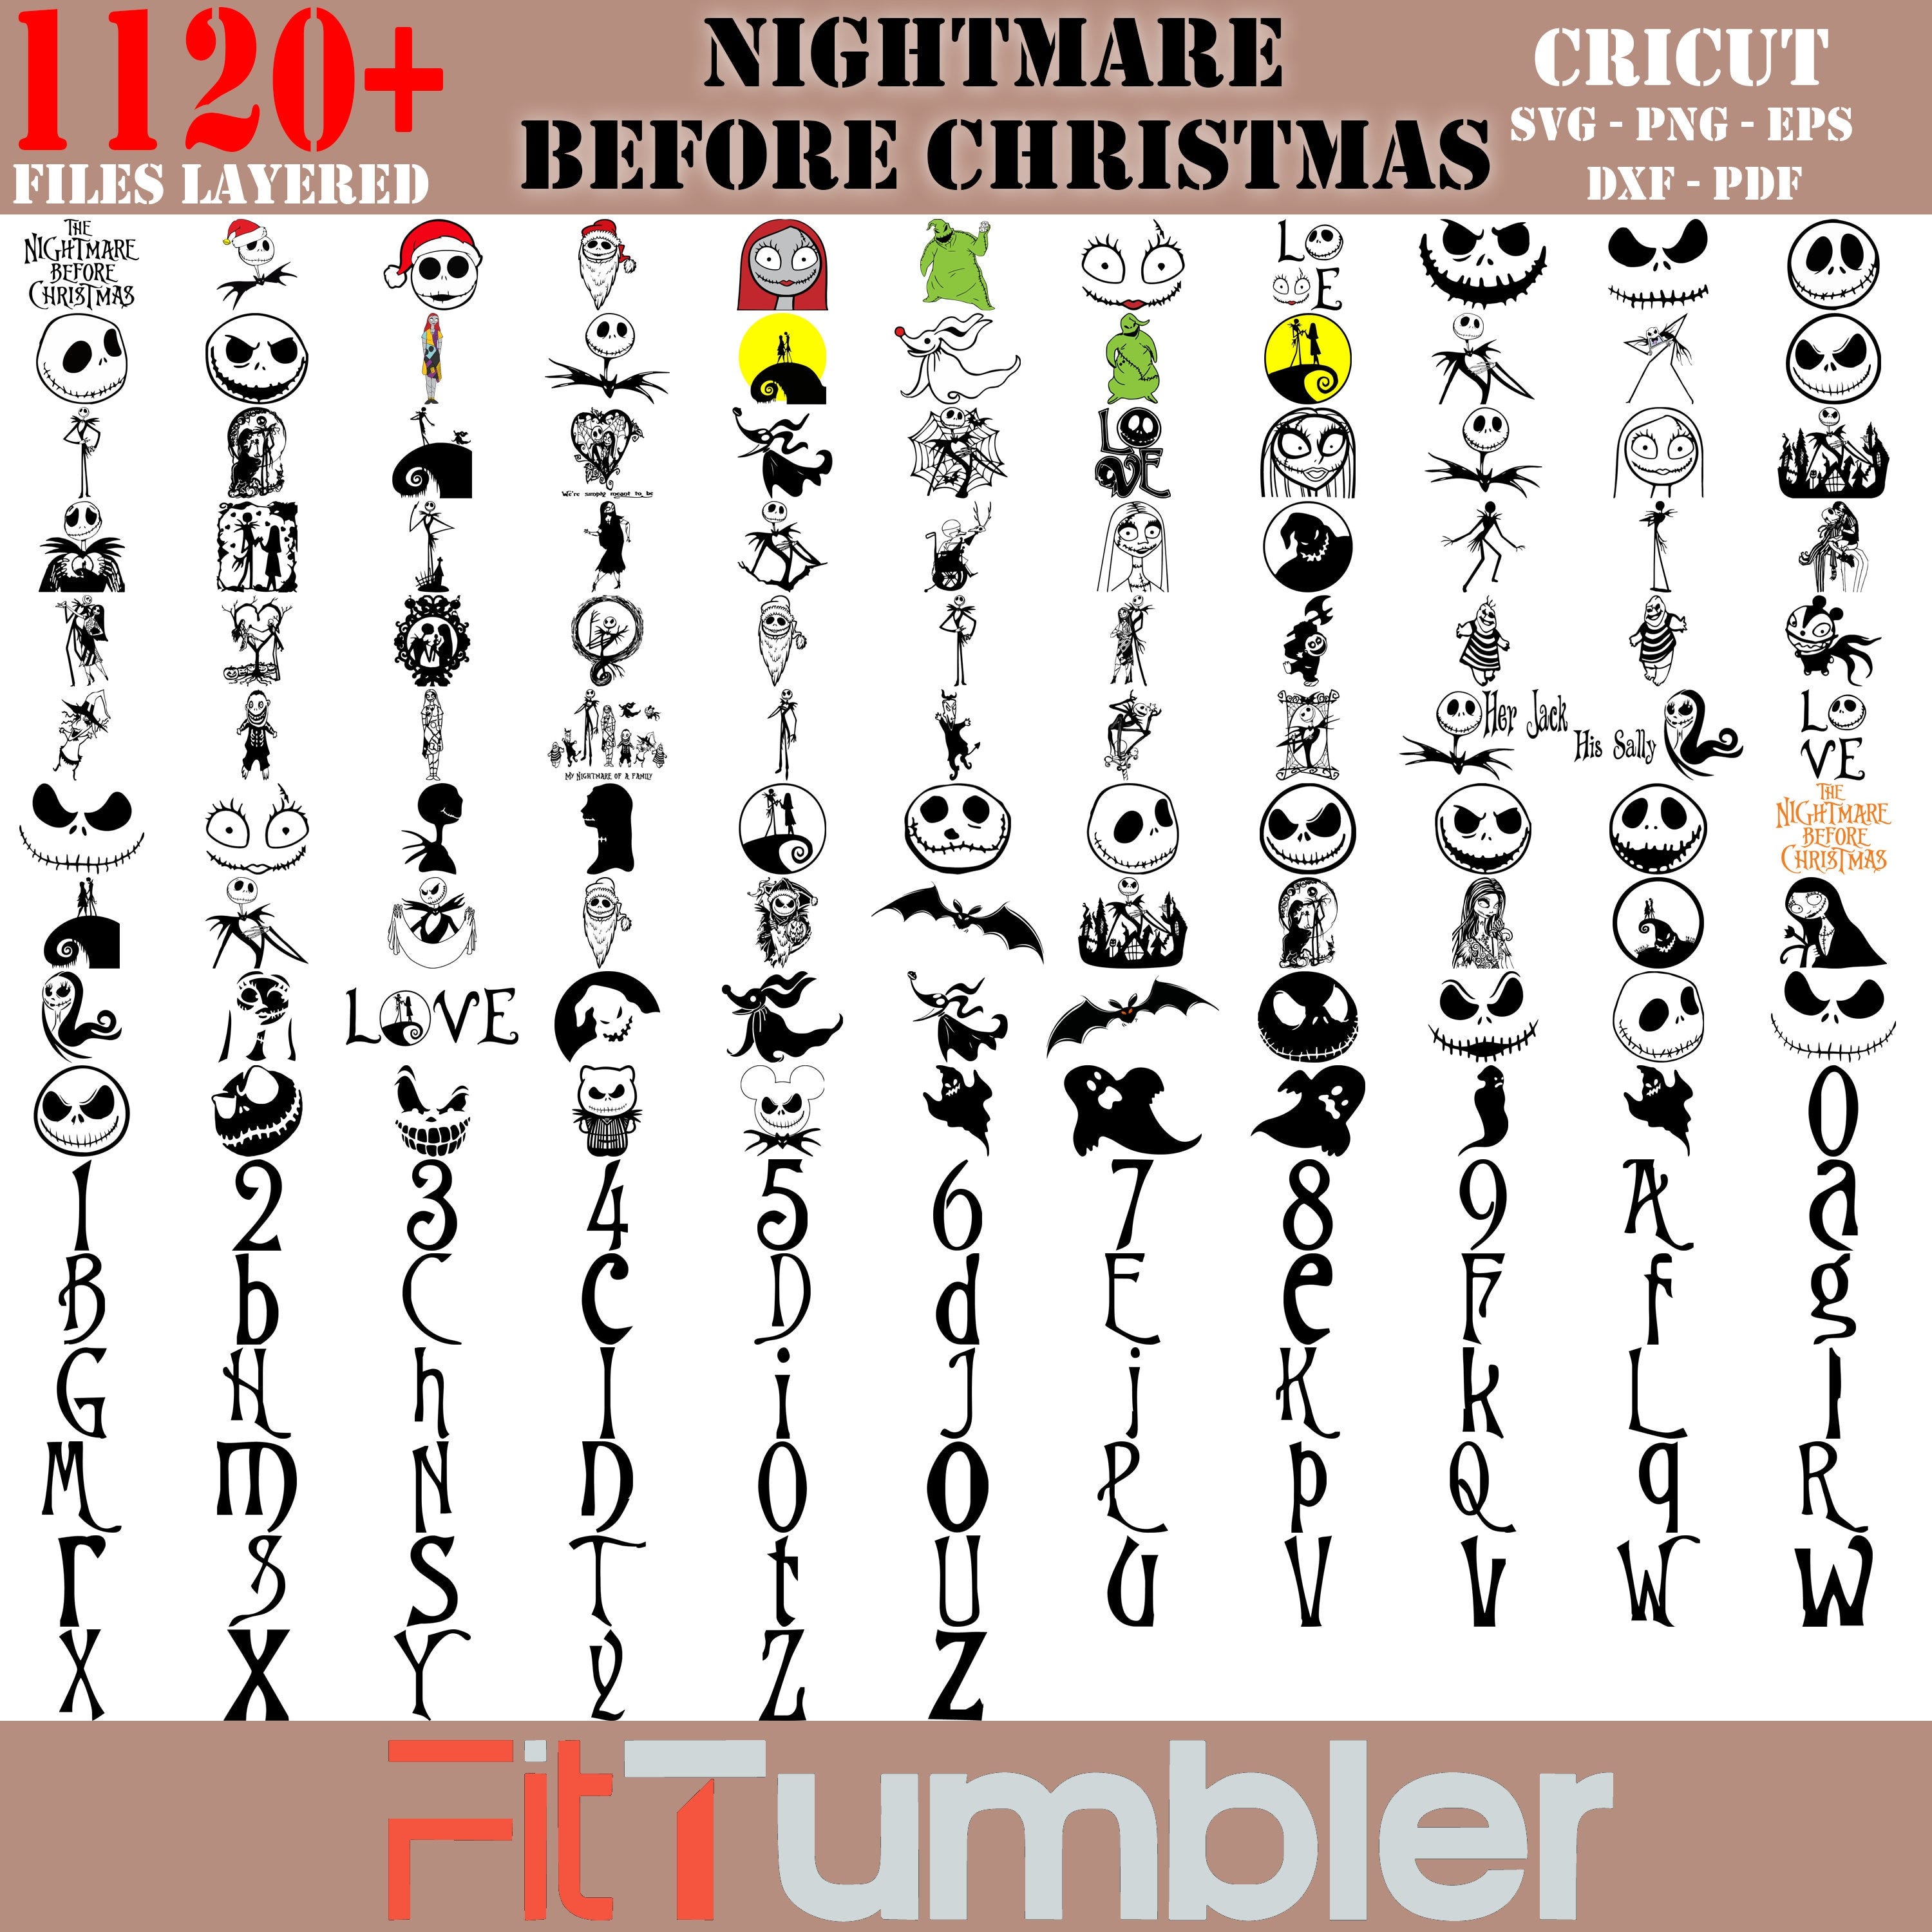 The Nightmare Before Christmas 1020 Files Svg Bundle - Layered Design Vector Files - SVG for cricut - PNG, DXF, Svg, Eps